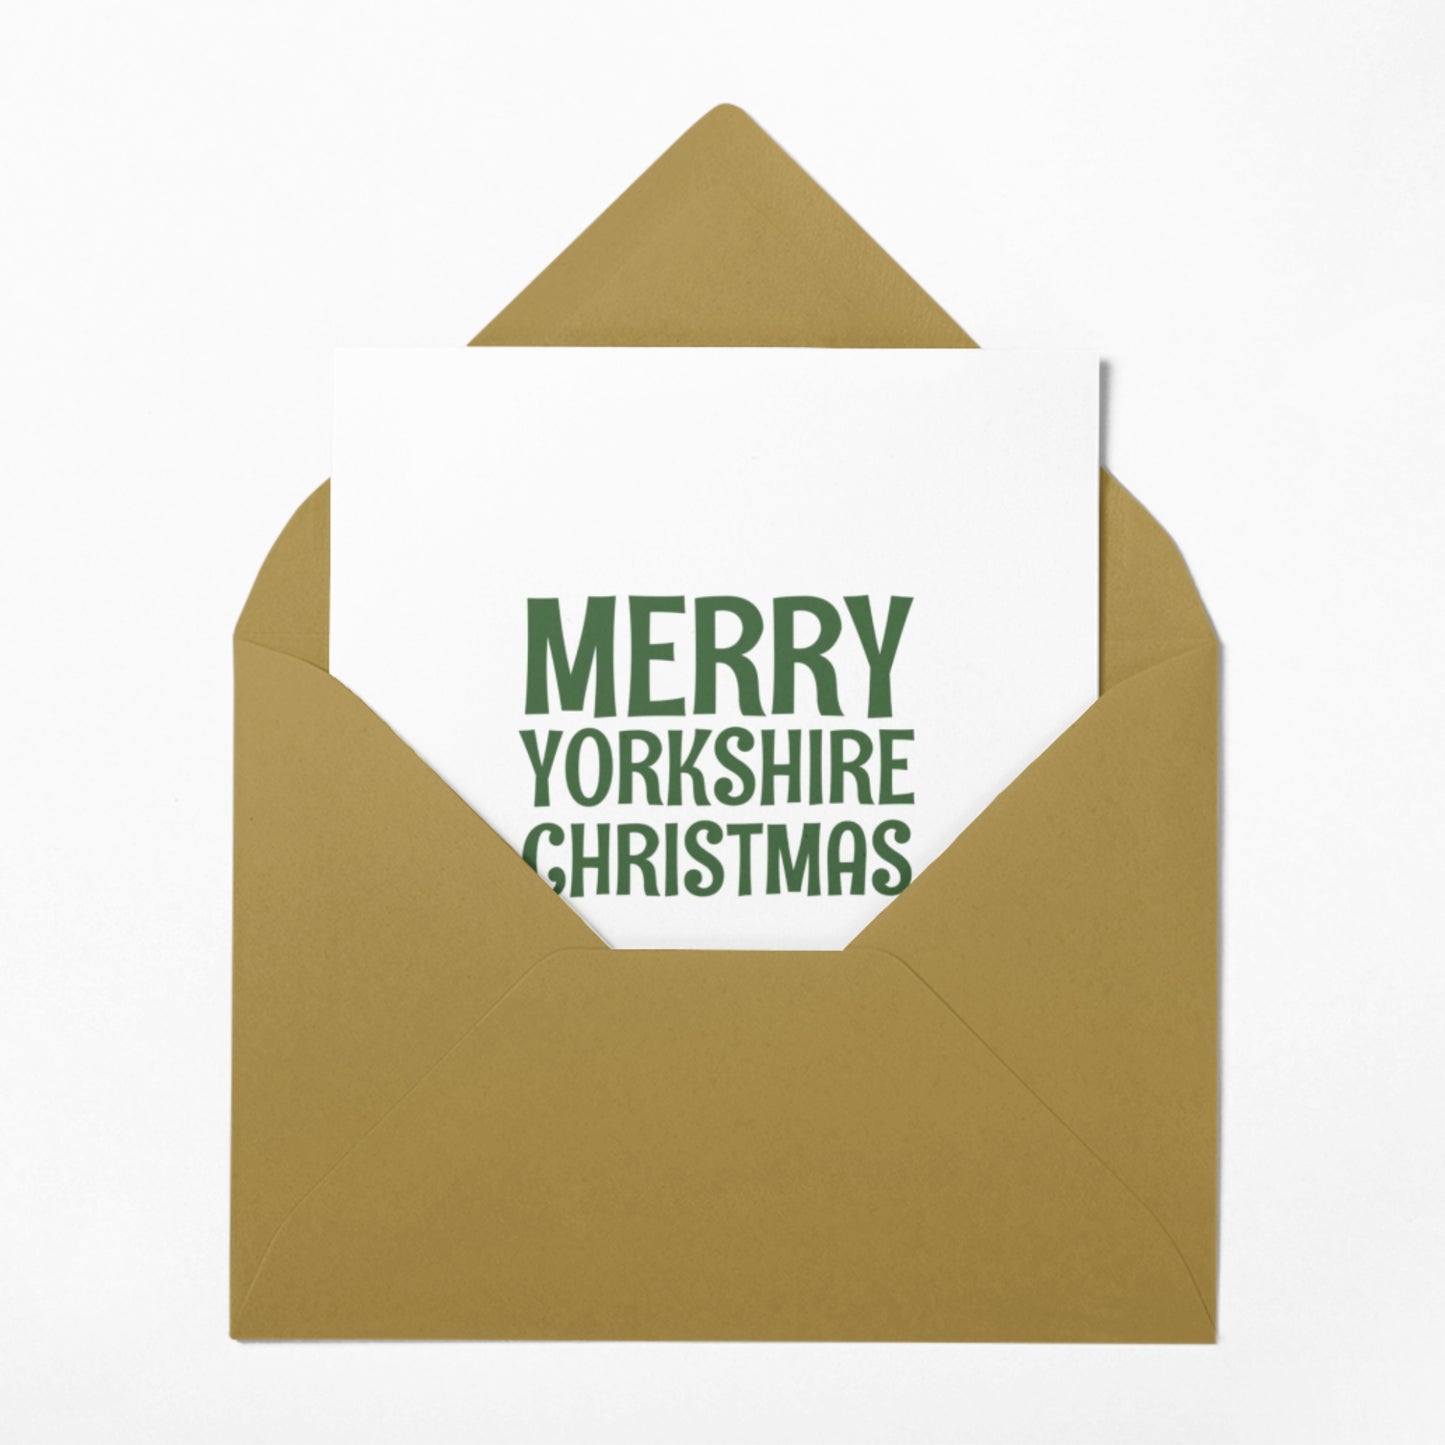 Merry Yorkshire Christmas Greeting Card - The Great Yorkshire Shop